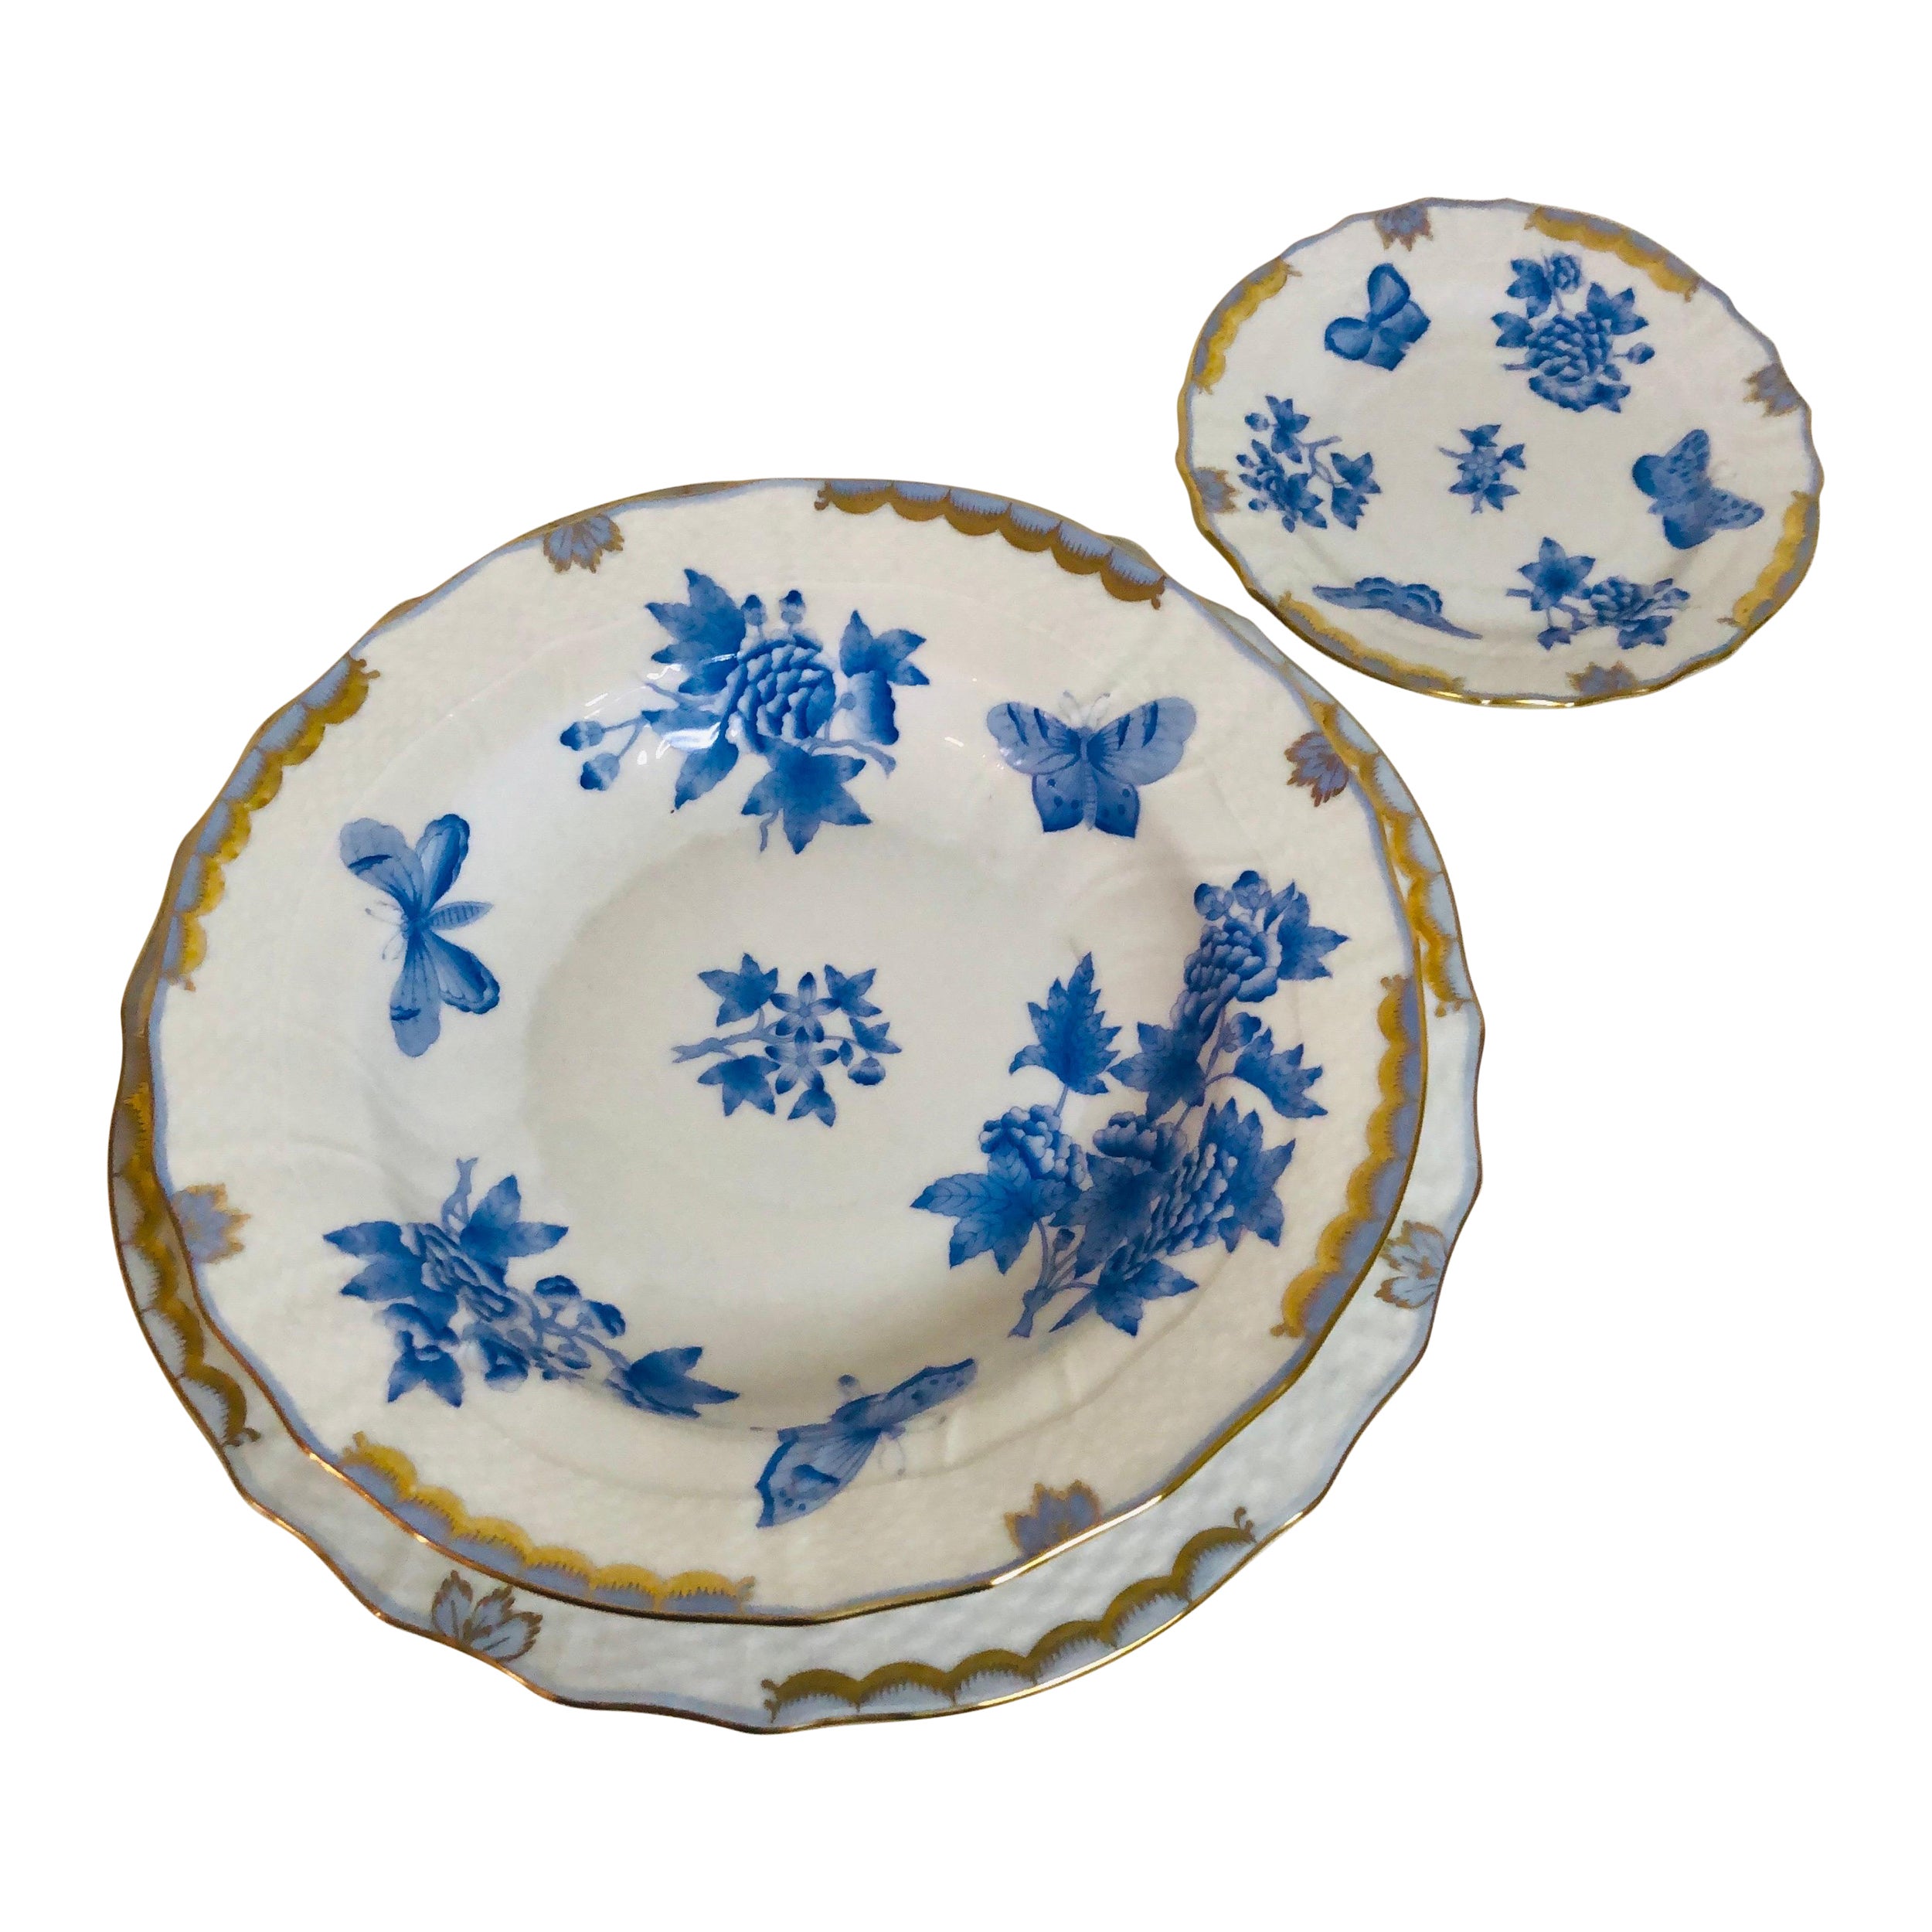 Extensive Herend Fortuna Dinner Service Painted with Butterflies and Flowers